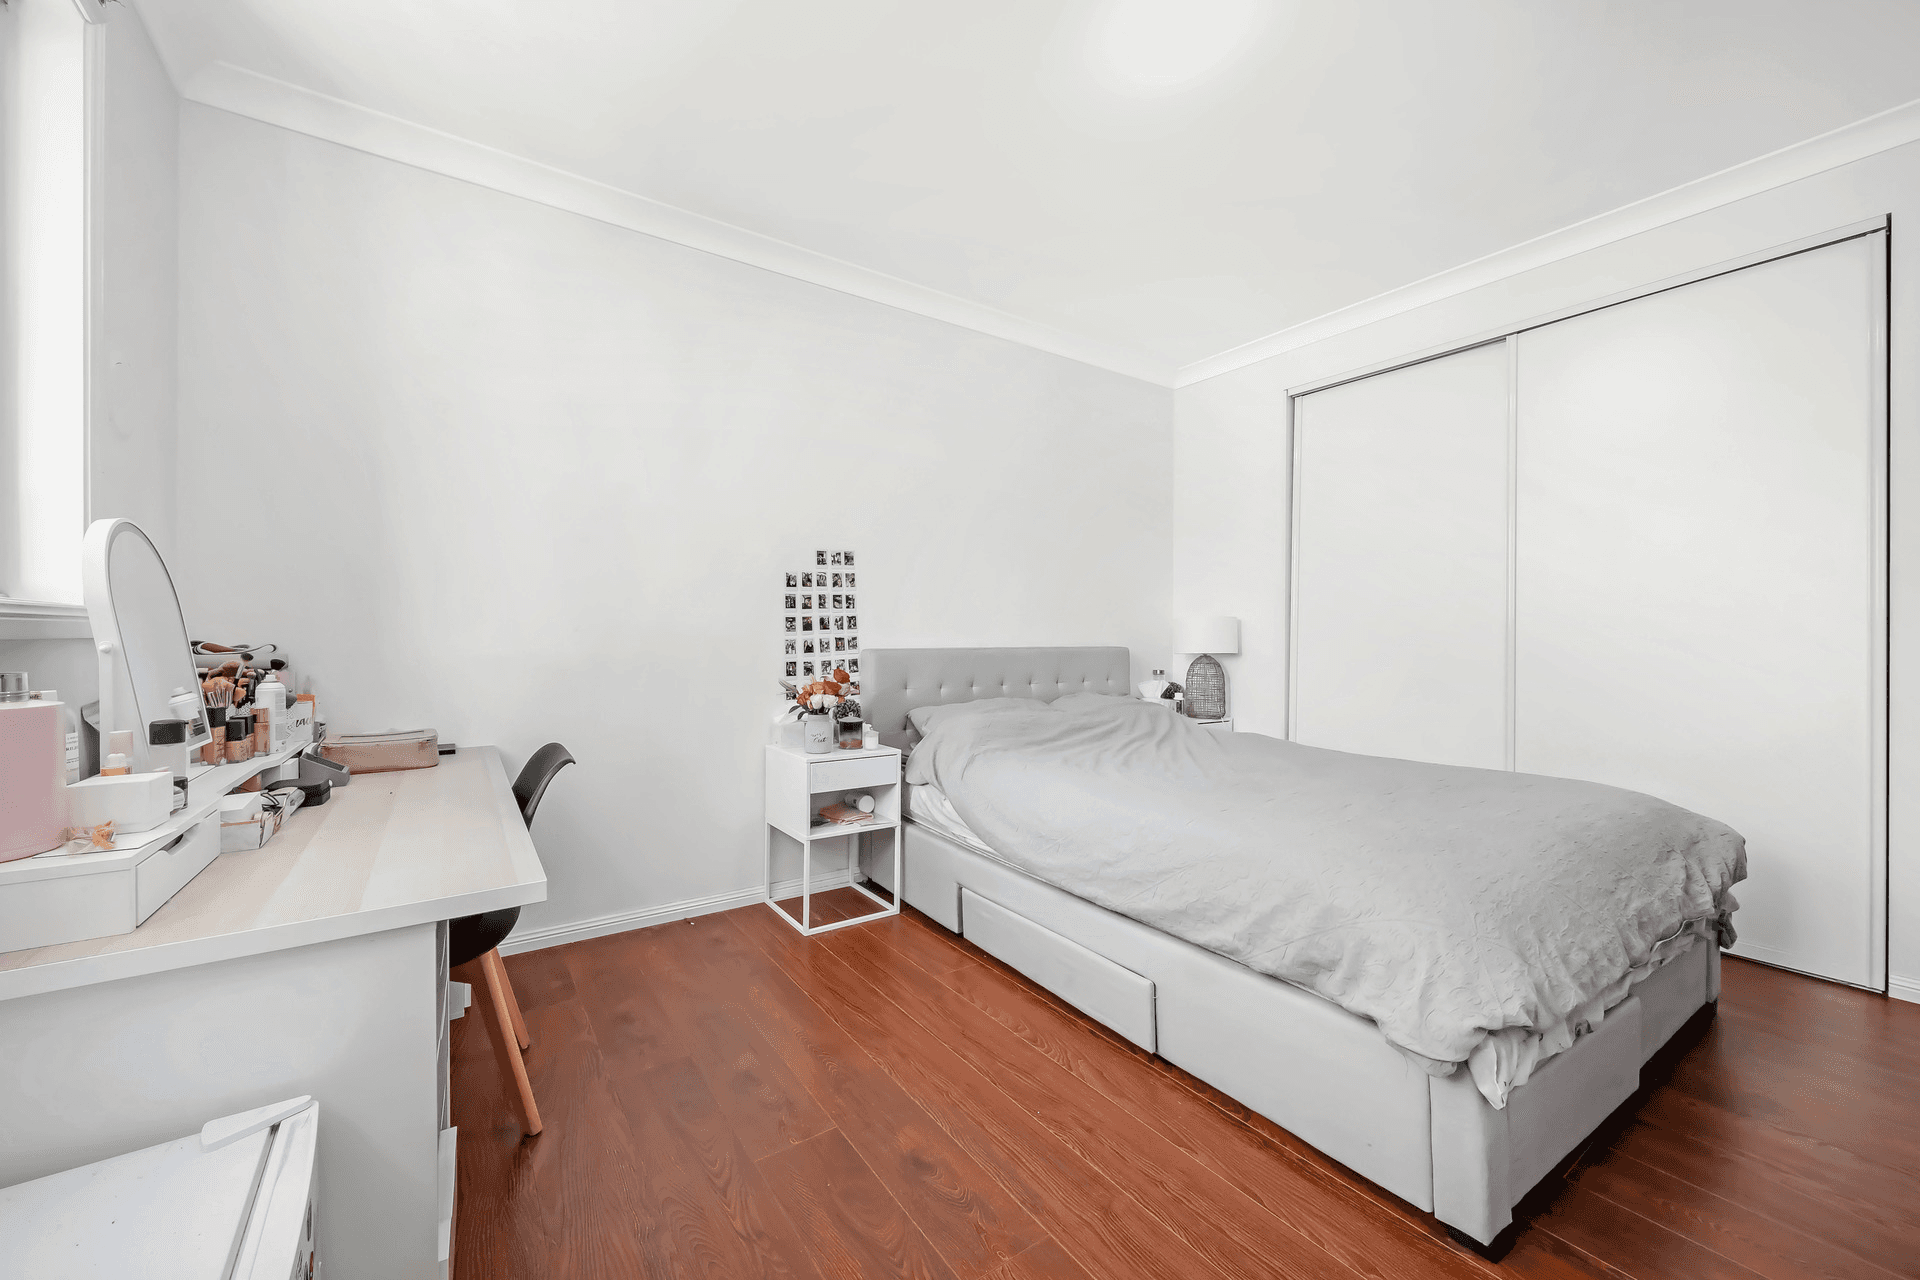 140 The River Road, Revesby, NSW 2212